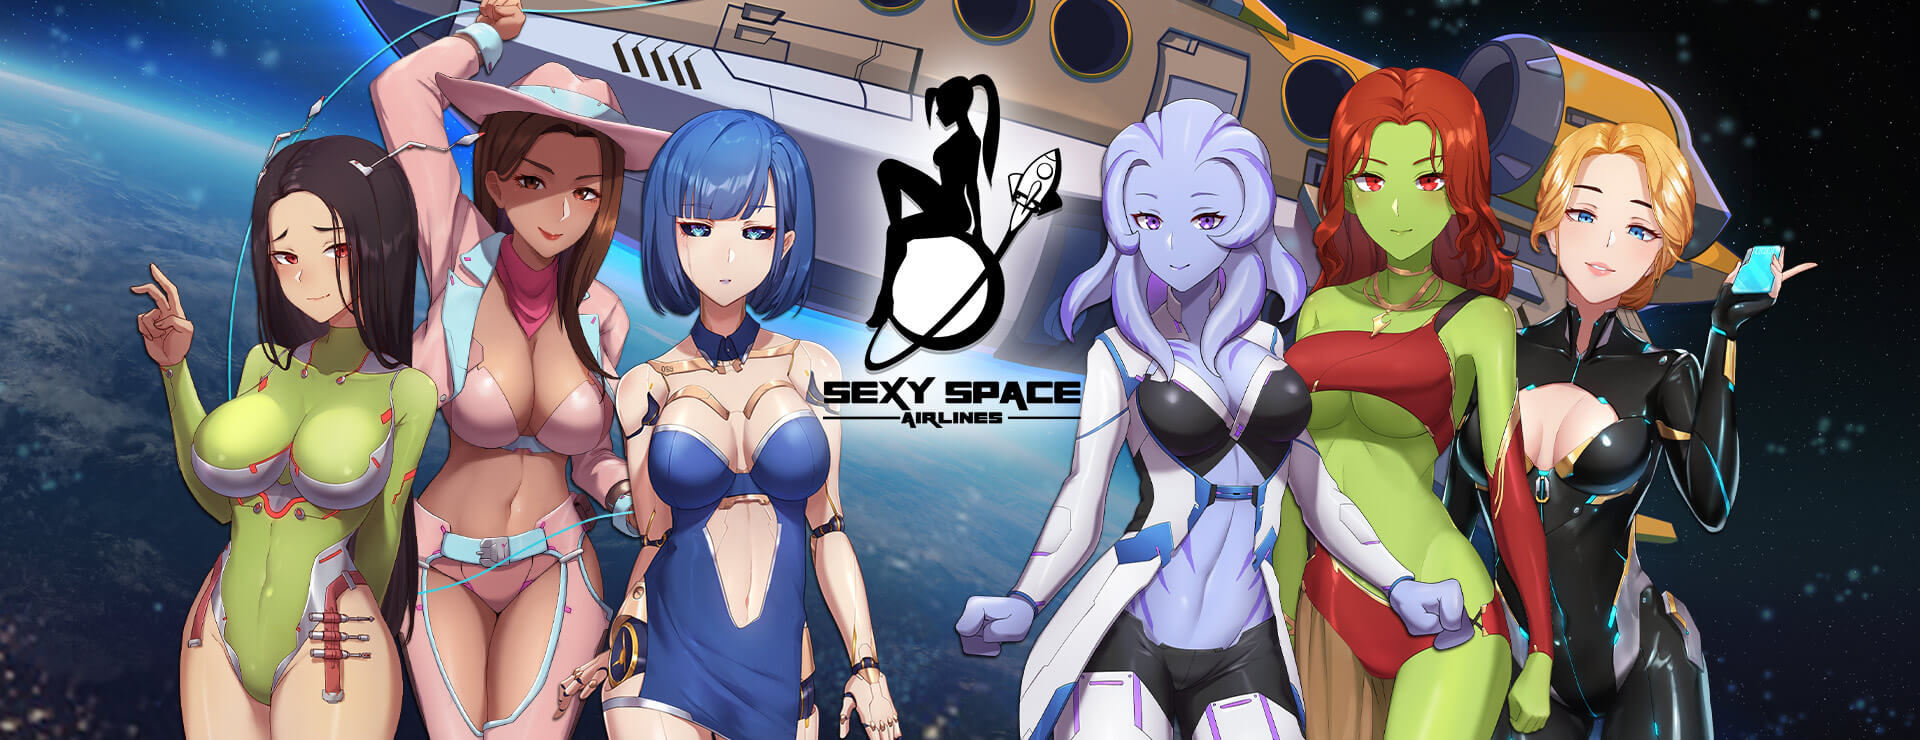 Sexy Space Airlines - 休闲游戏 遊戲